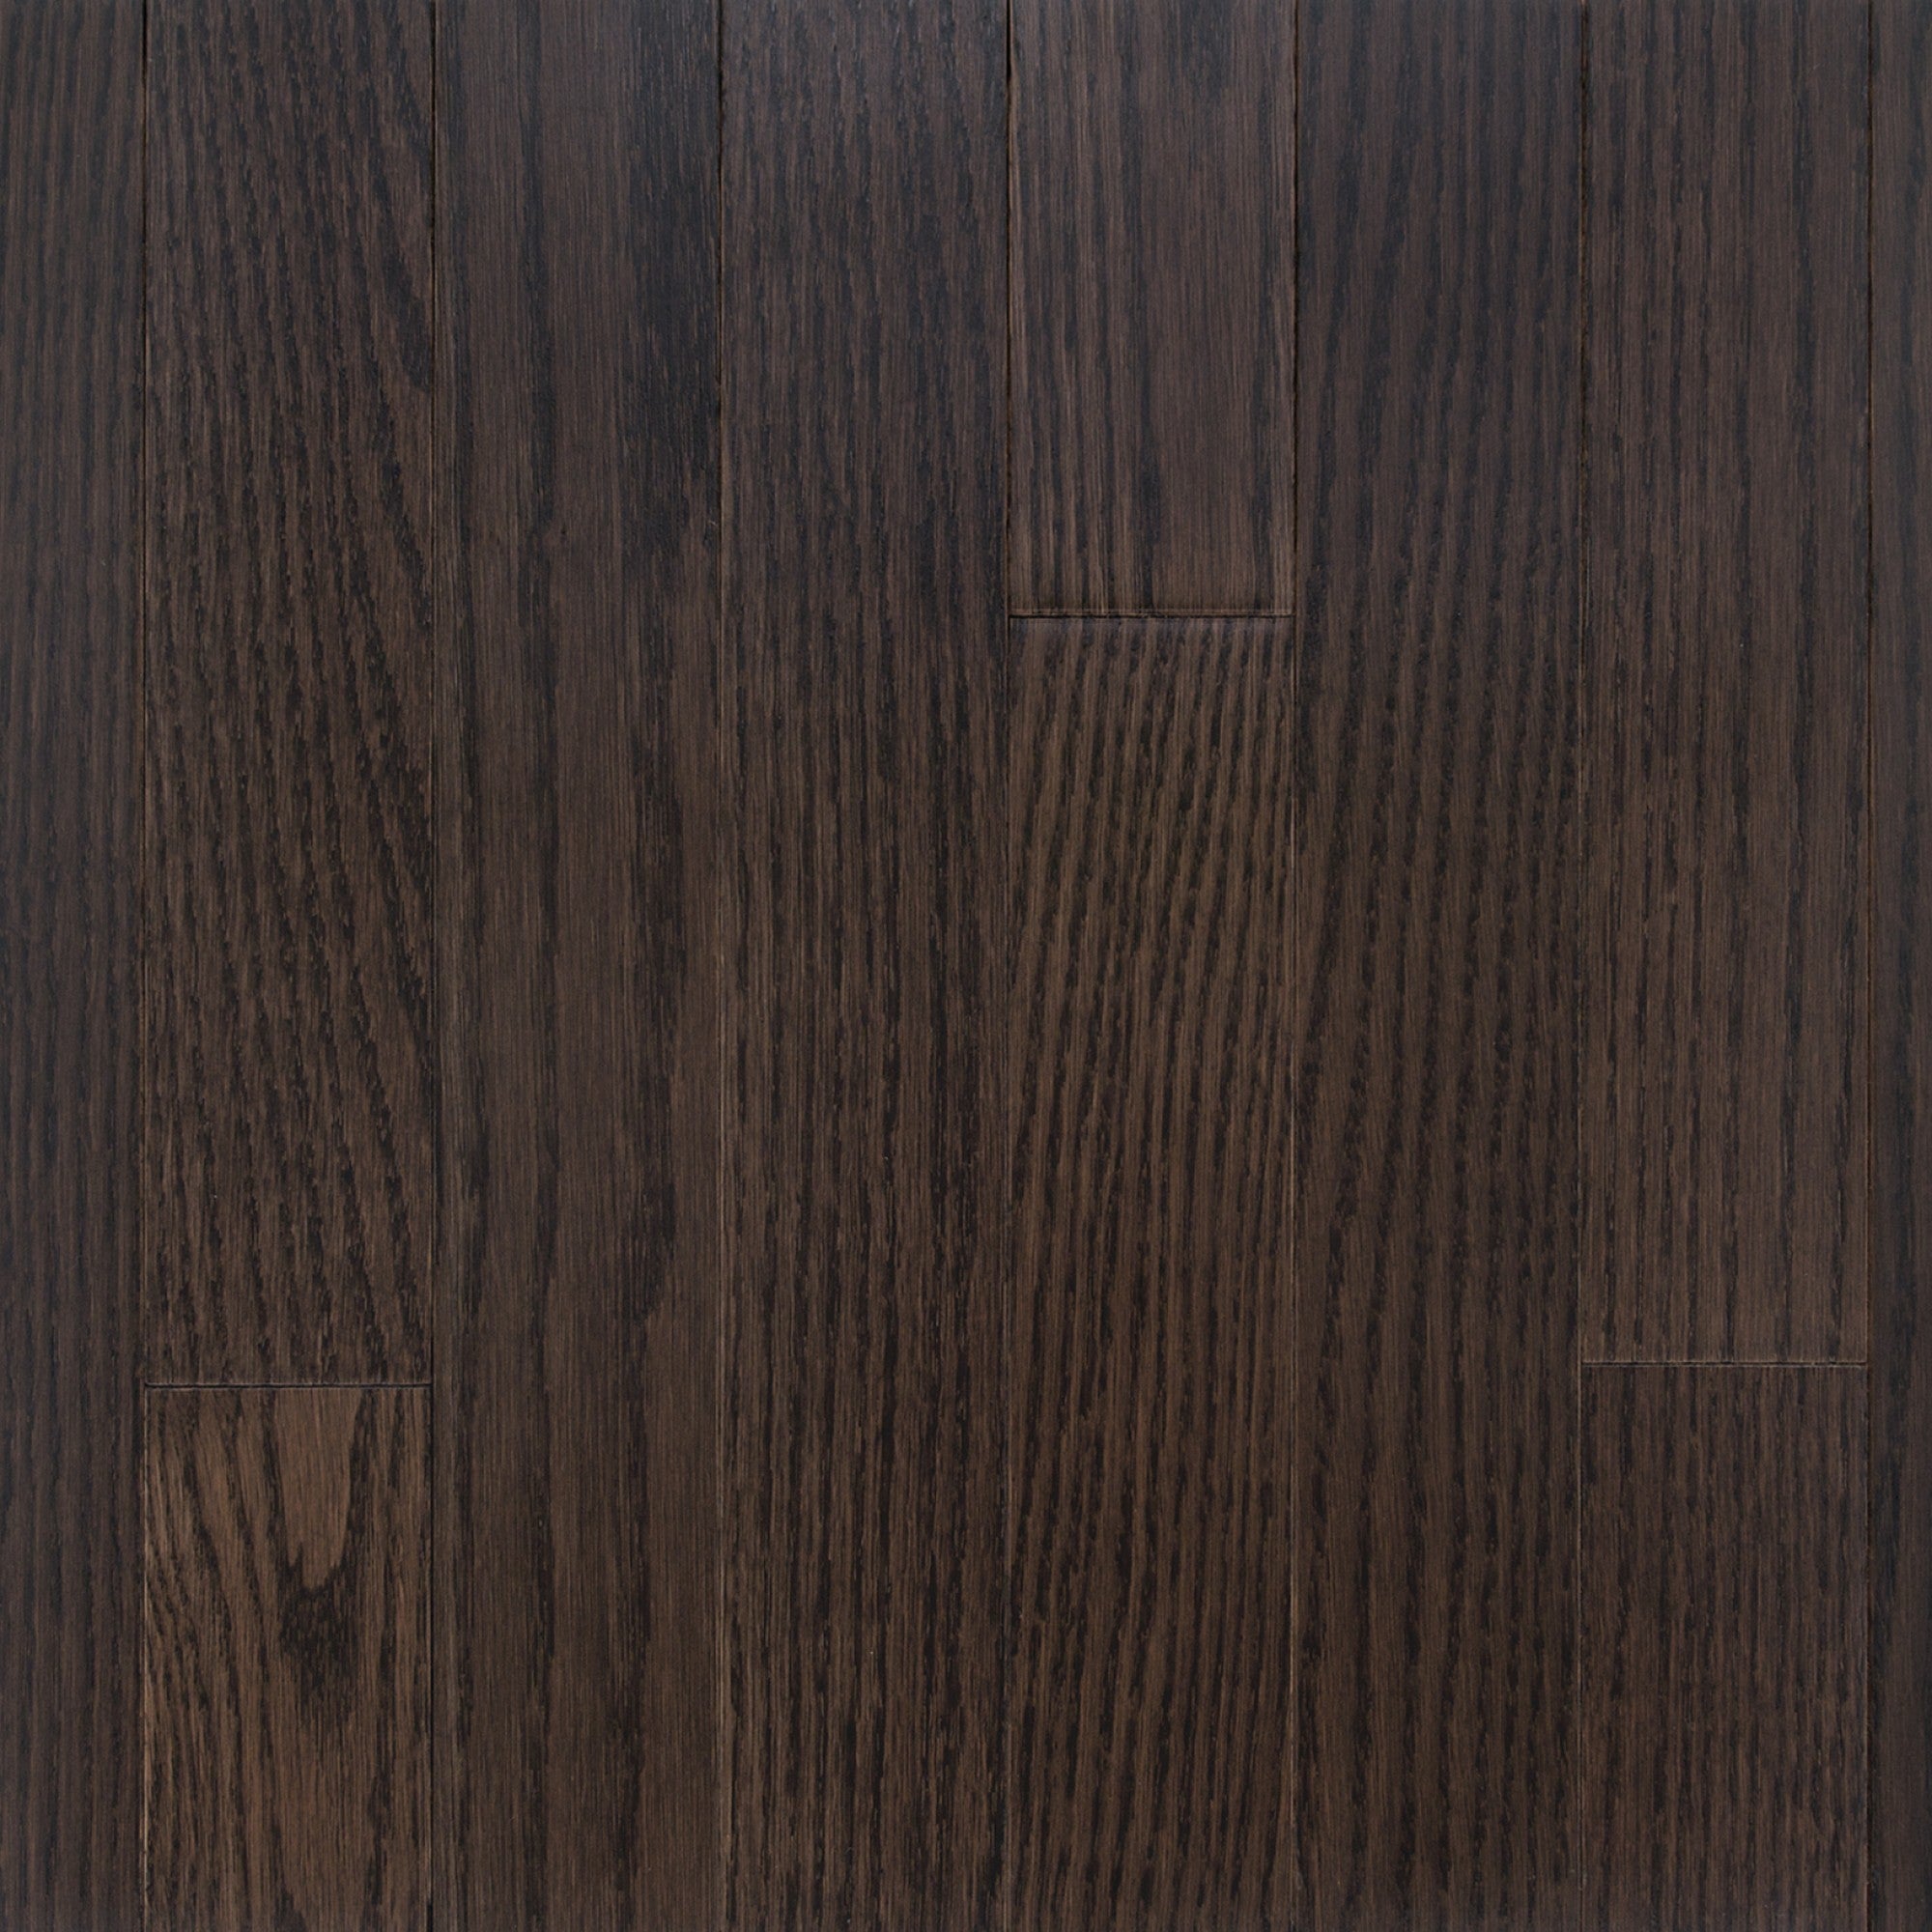 Vintage Northern Solid Sawn Red Oak Berkshire Smooth 6 1/2" x 3/4" Pearl Low Sheen Character Grade